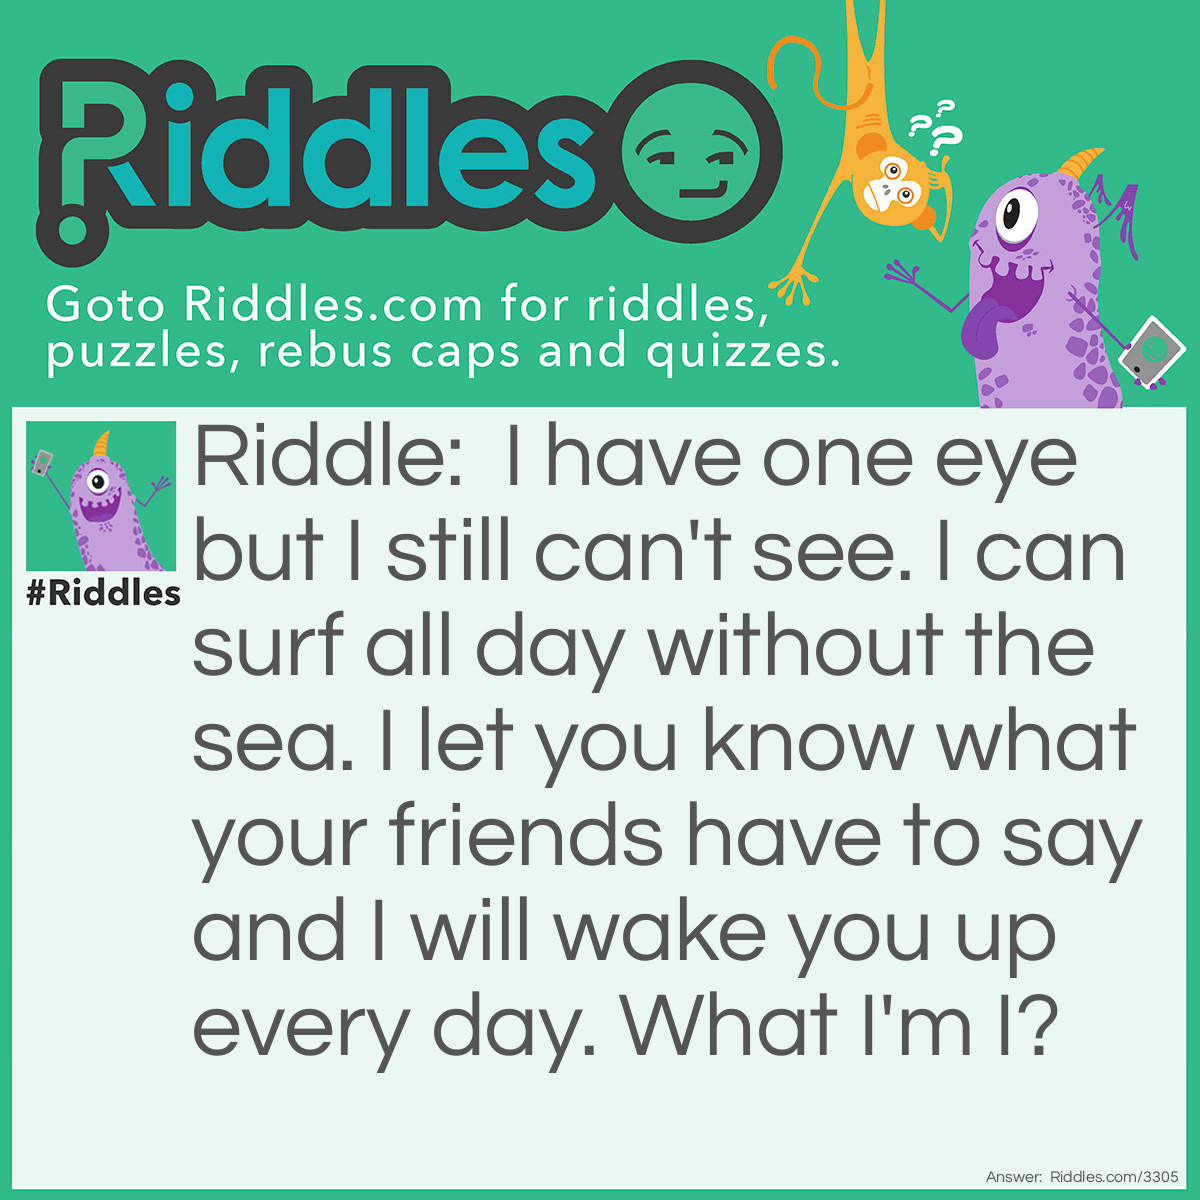 Riddle: I have one eye but I still can't see. I can surf all day without the sea. I let you know what your friends have to say and I will wake you up every day. What I'm I? Answer: An iphone.